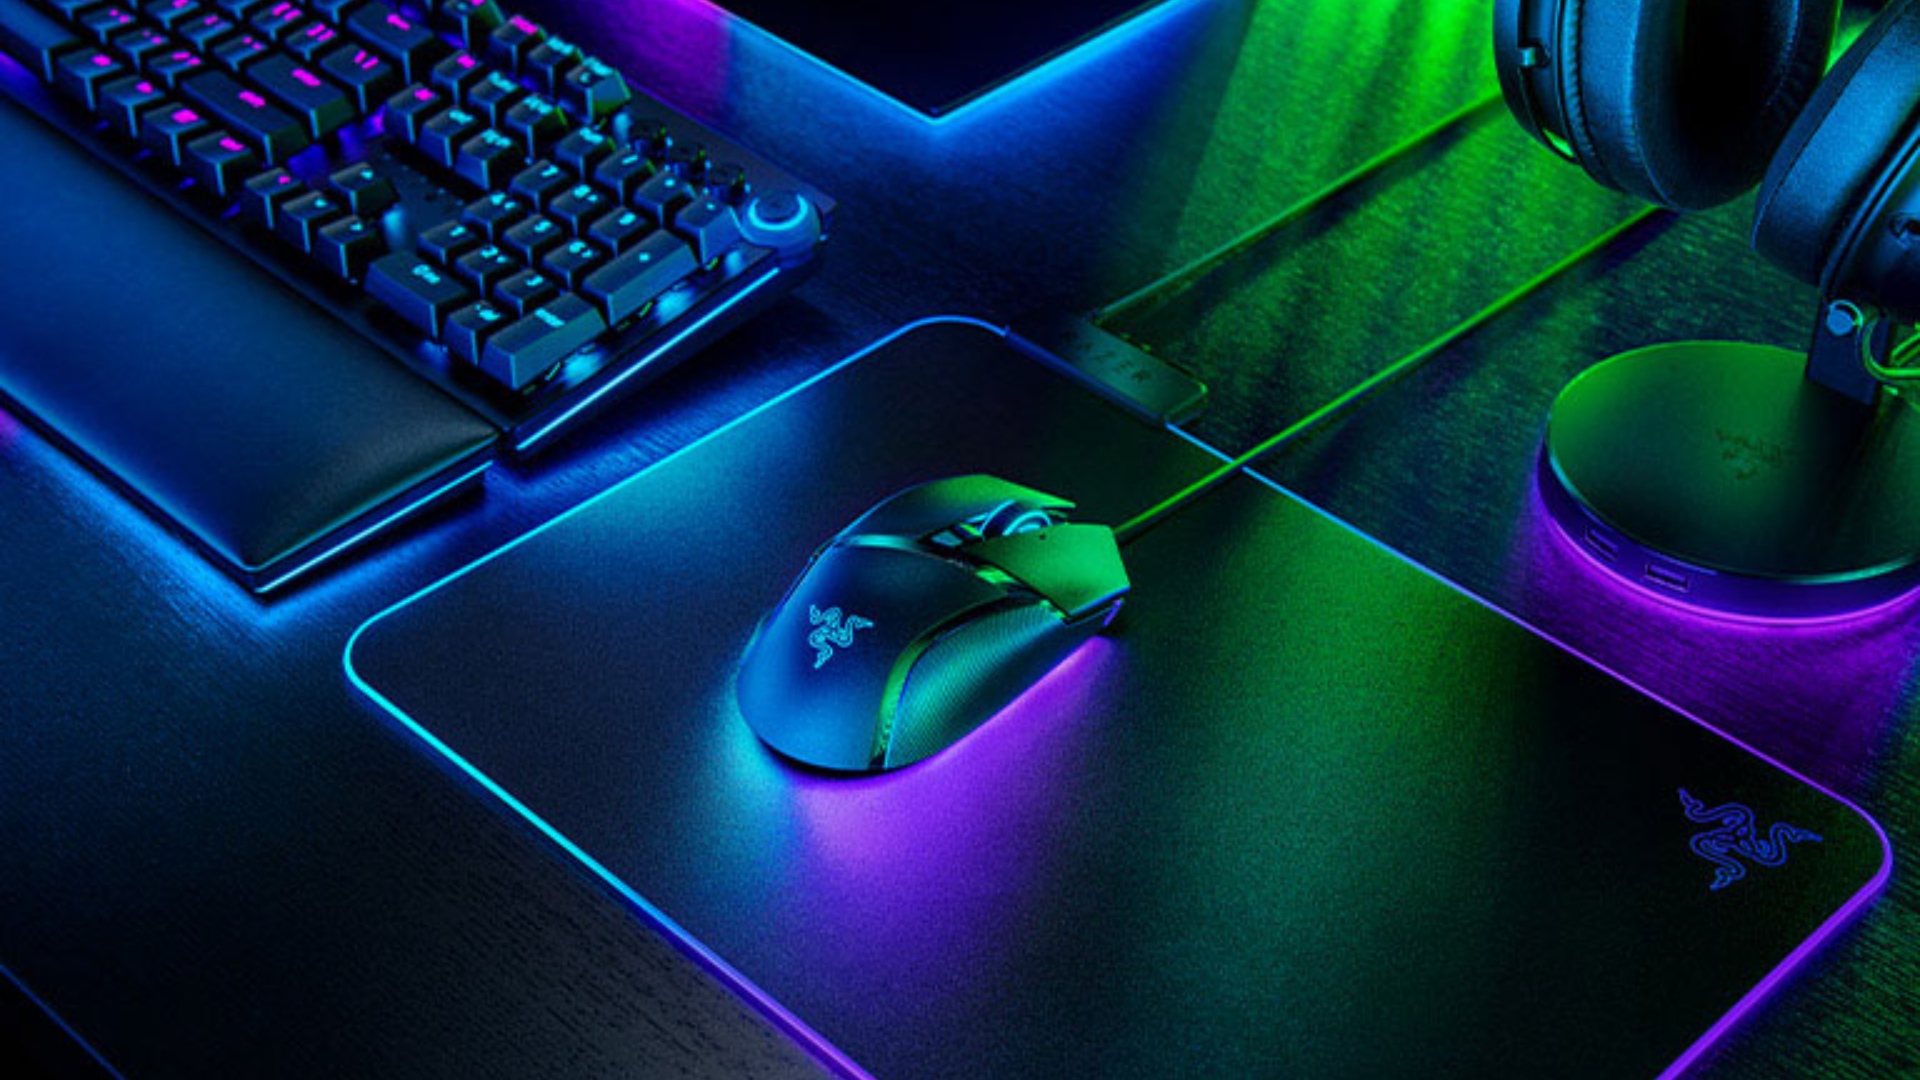 Get 35 off Razer gaming keyboards and more, plus a free gift